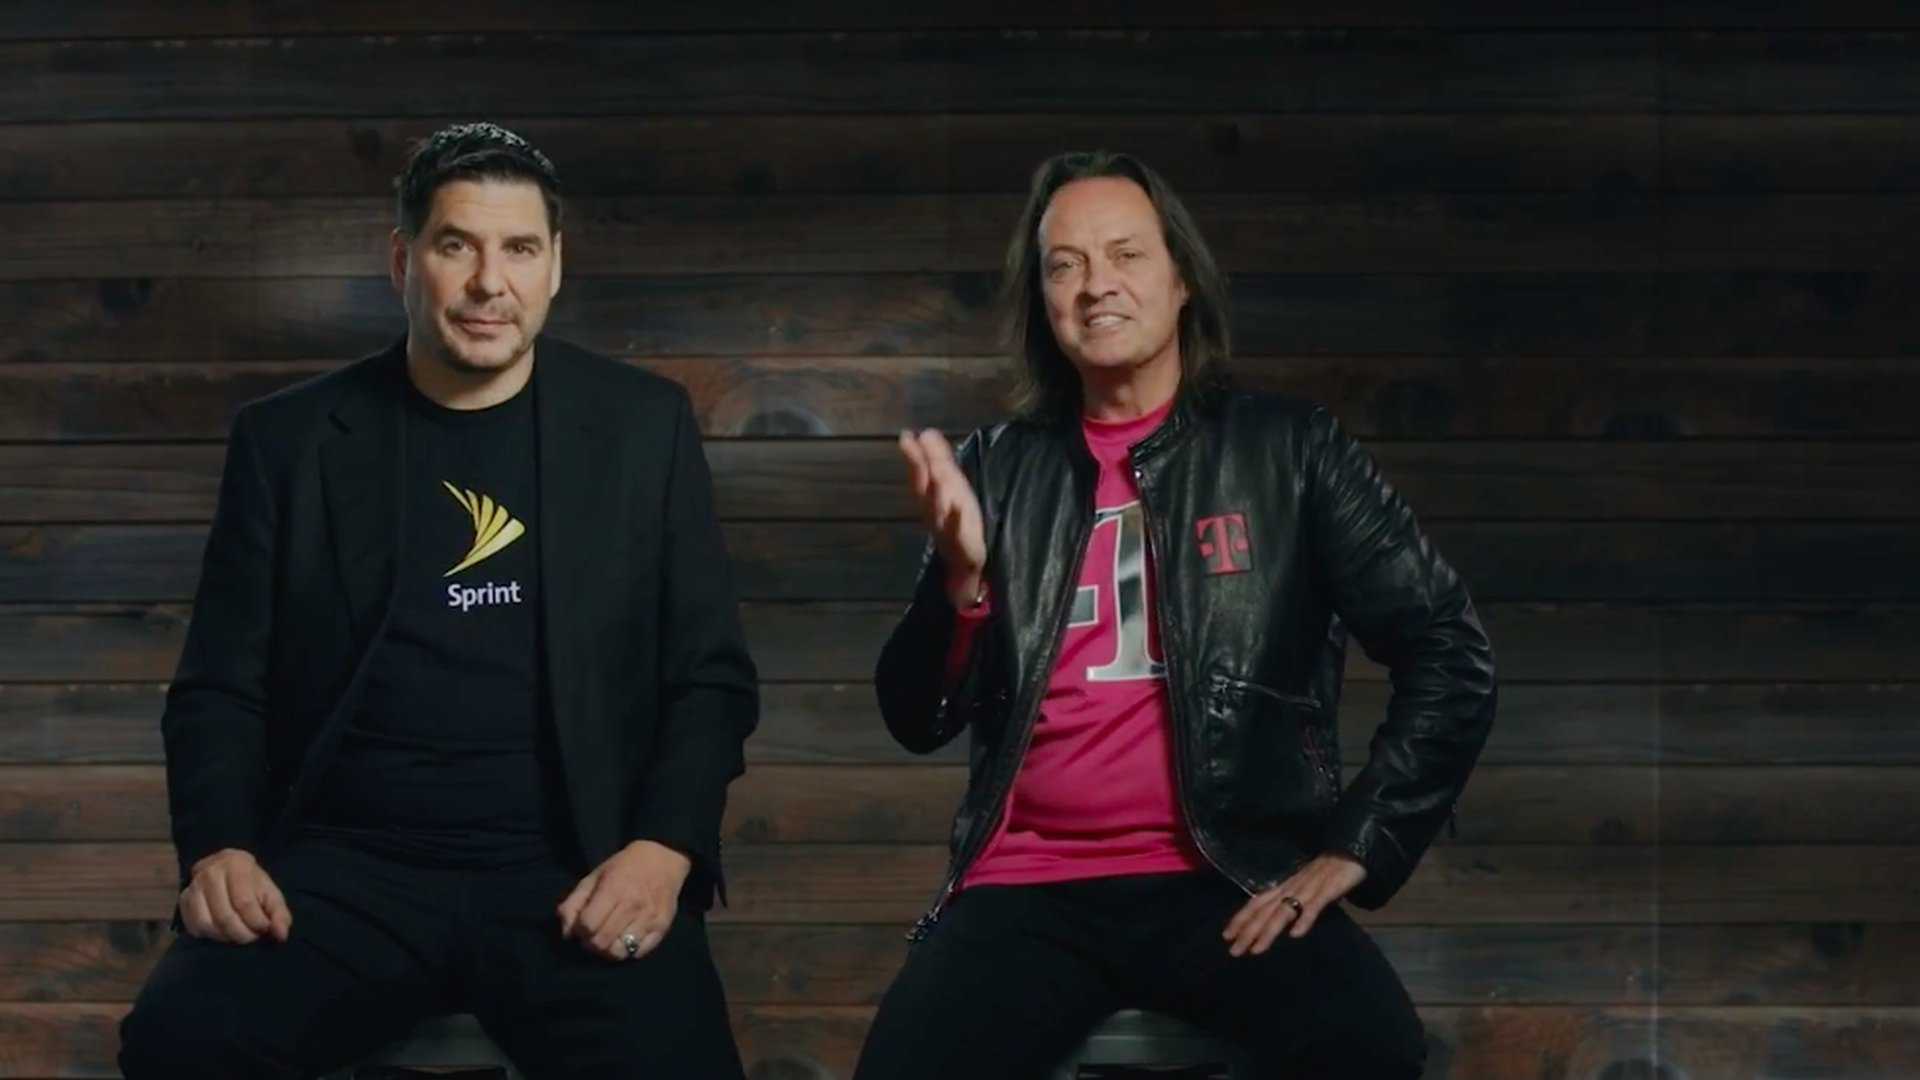 Sprint CEO Marcelo Claure and T-Mobile CEO John Legere